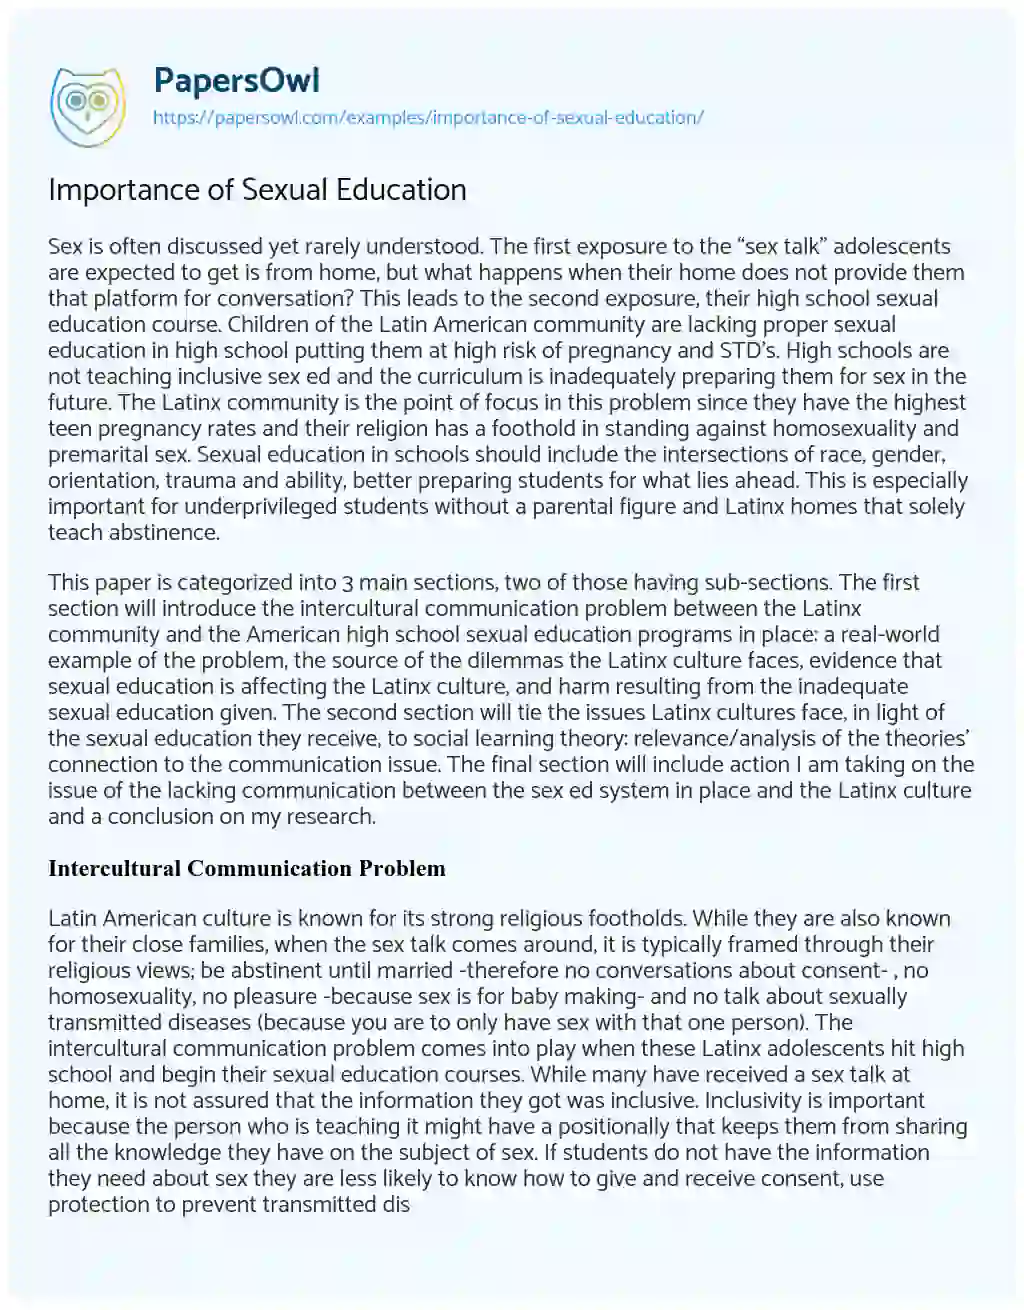 Importance of Sexual Education essay